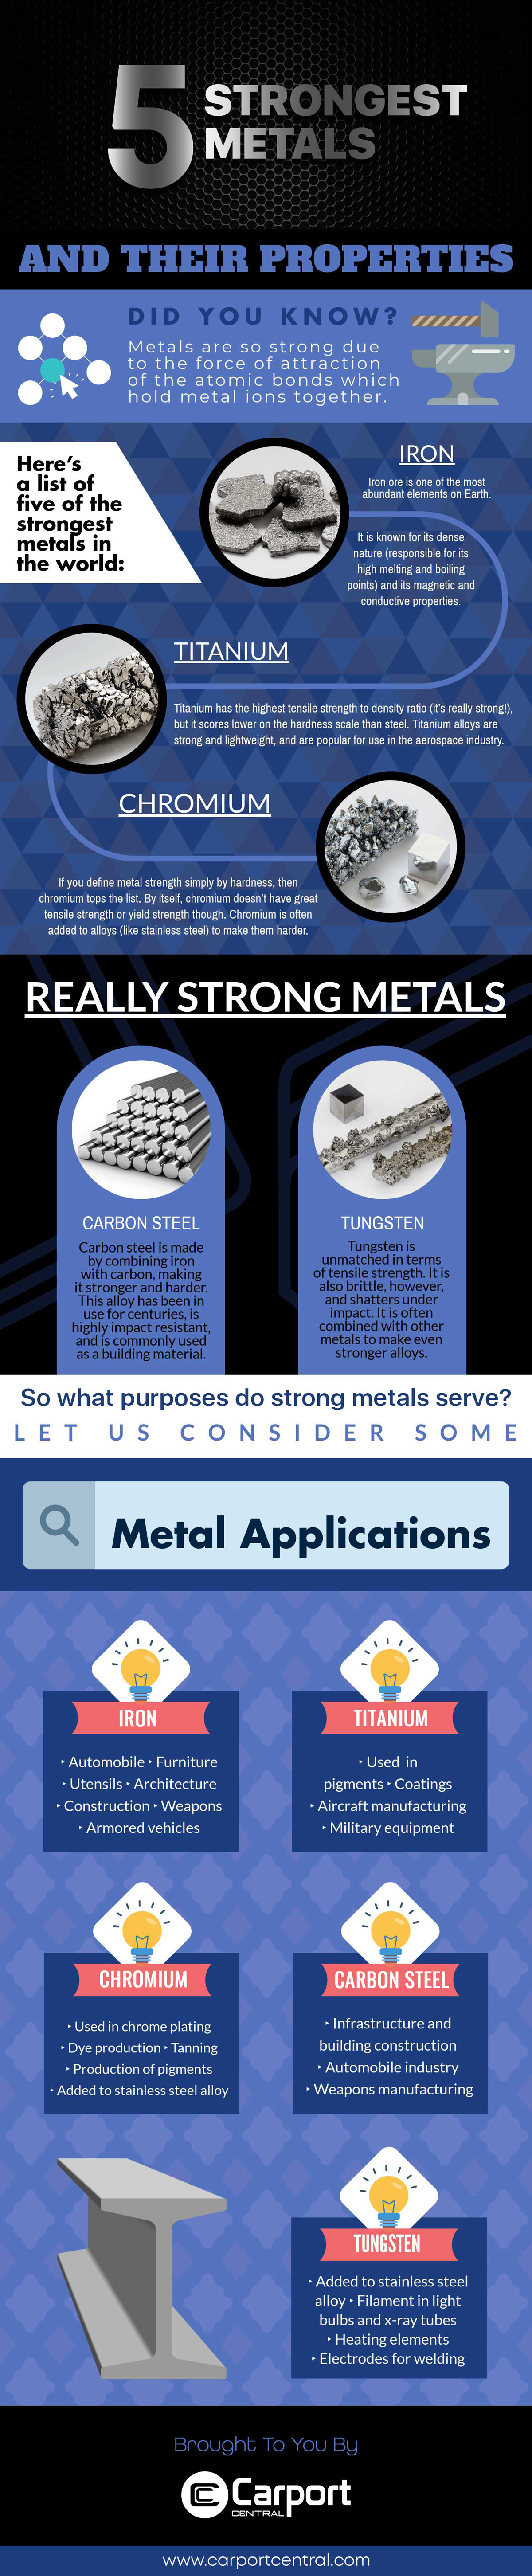 The 5 Strongest Metals and Their Properties